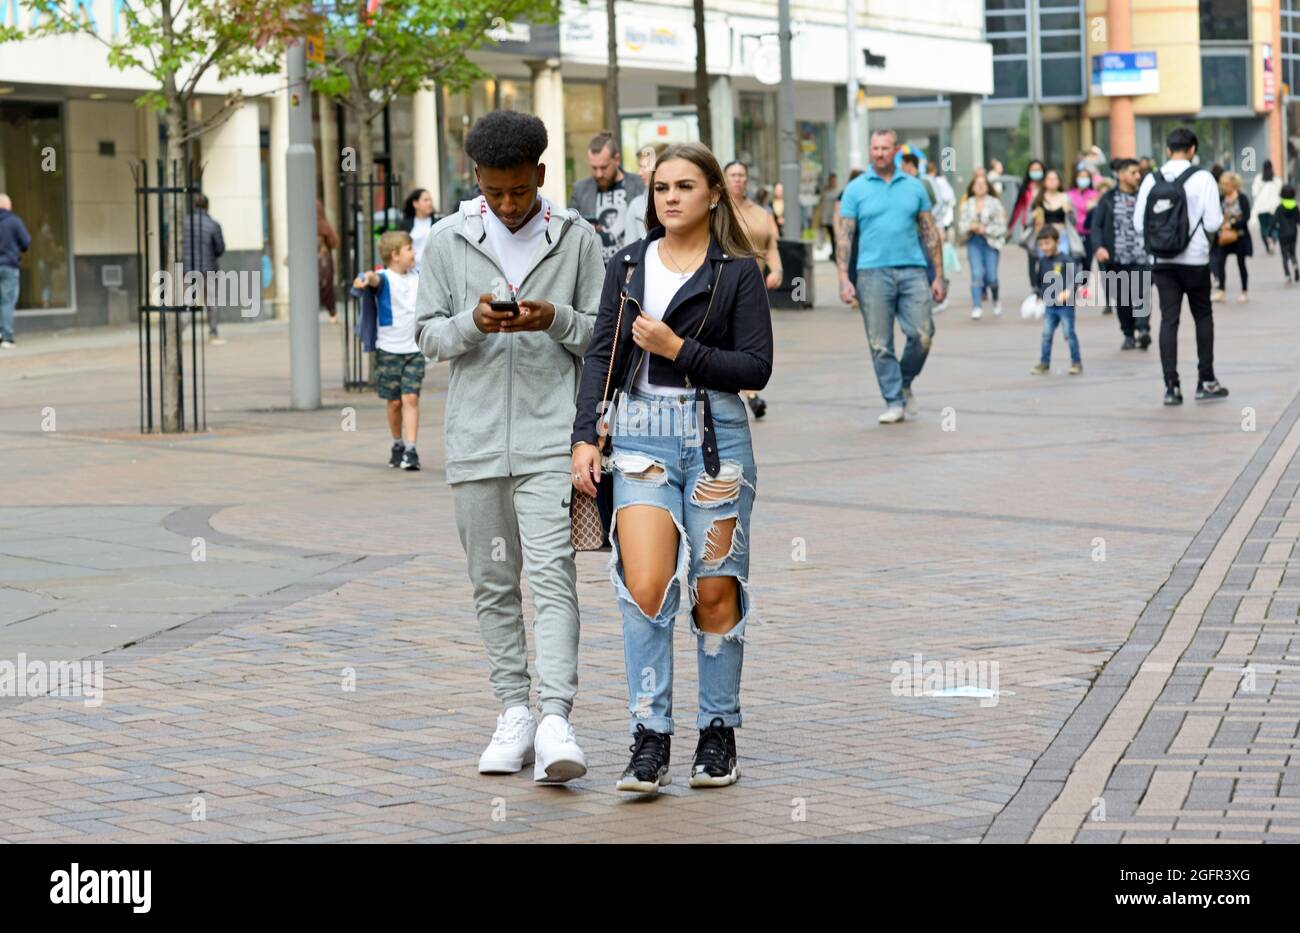 Couple of different race, out together, ripped jeans. Stock Photo